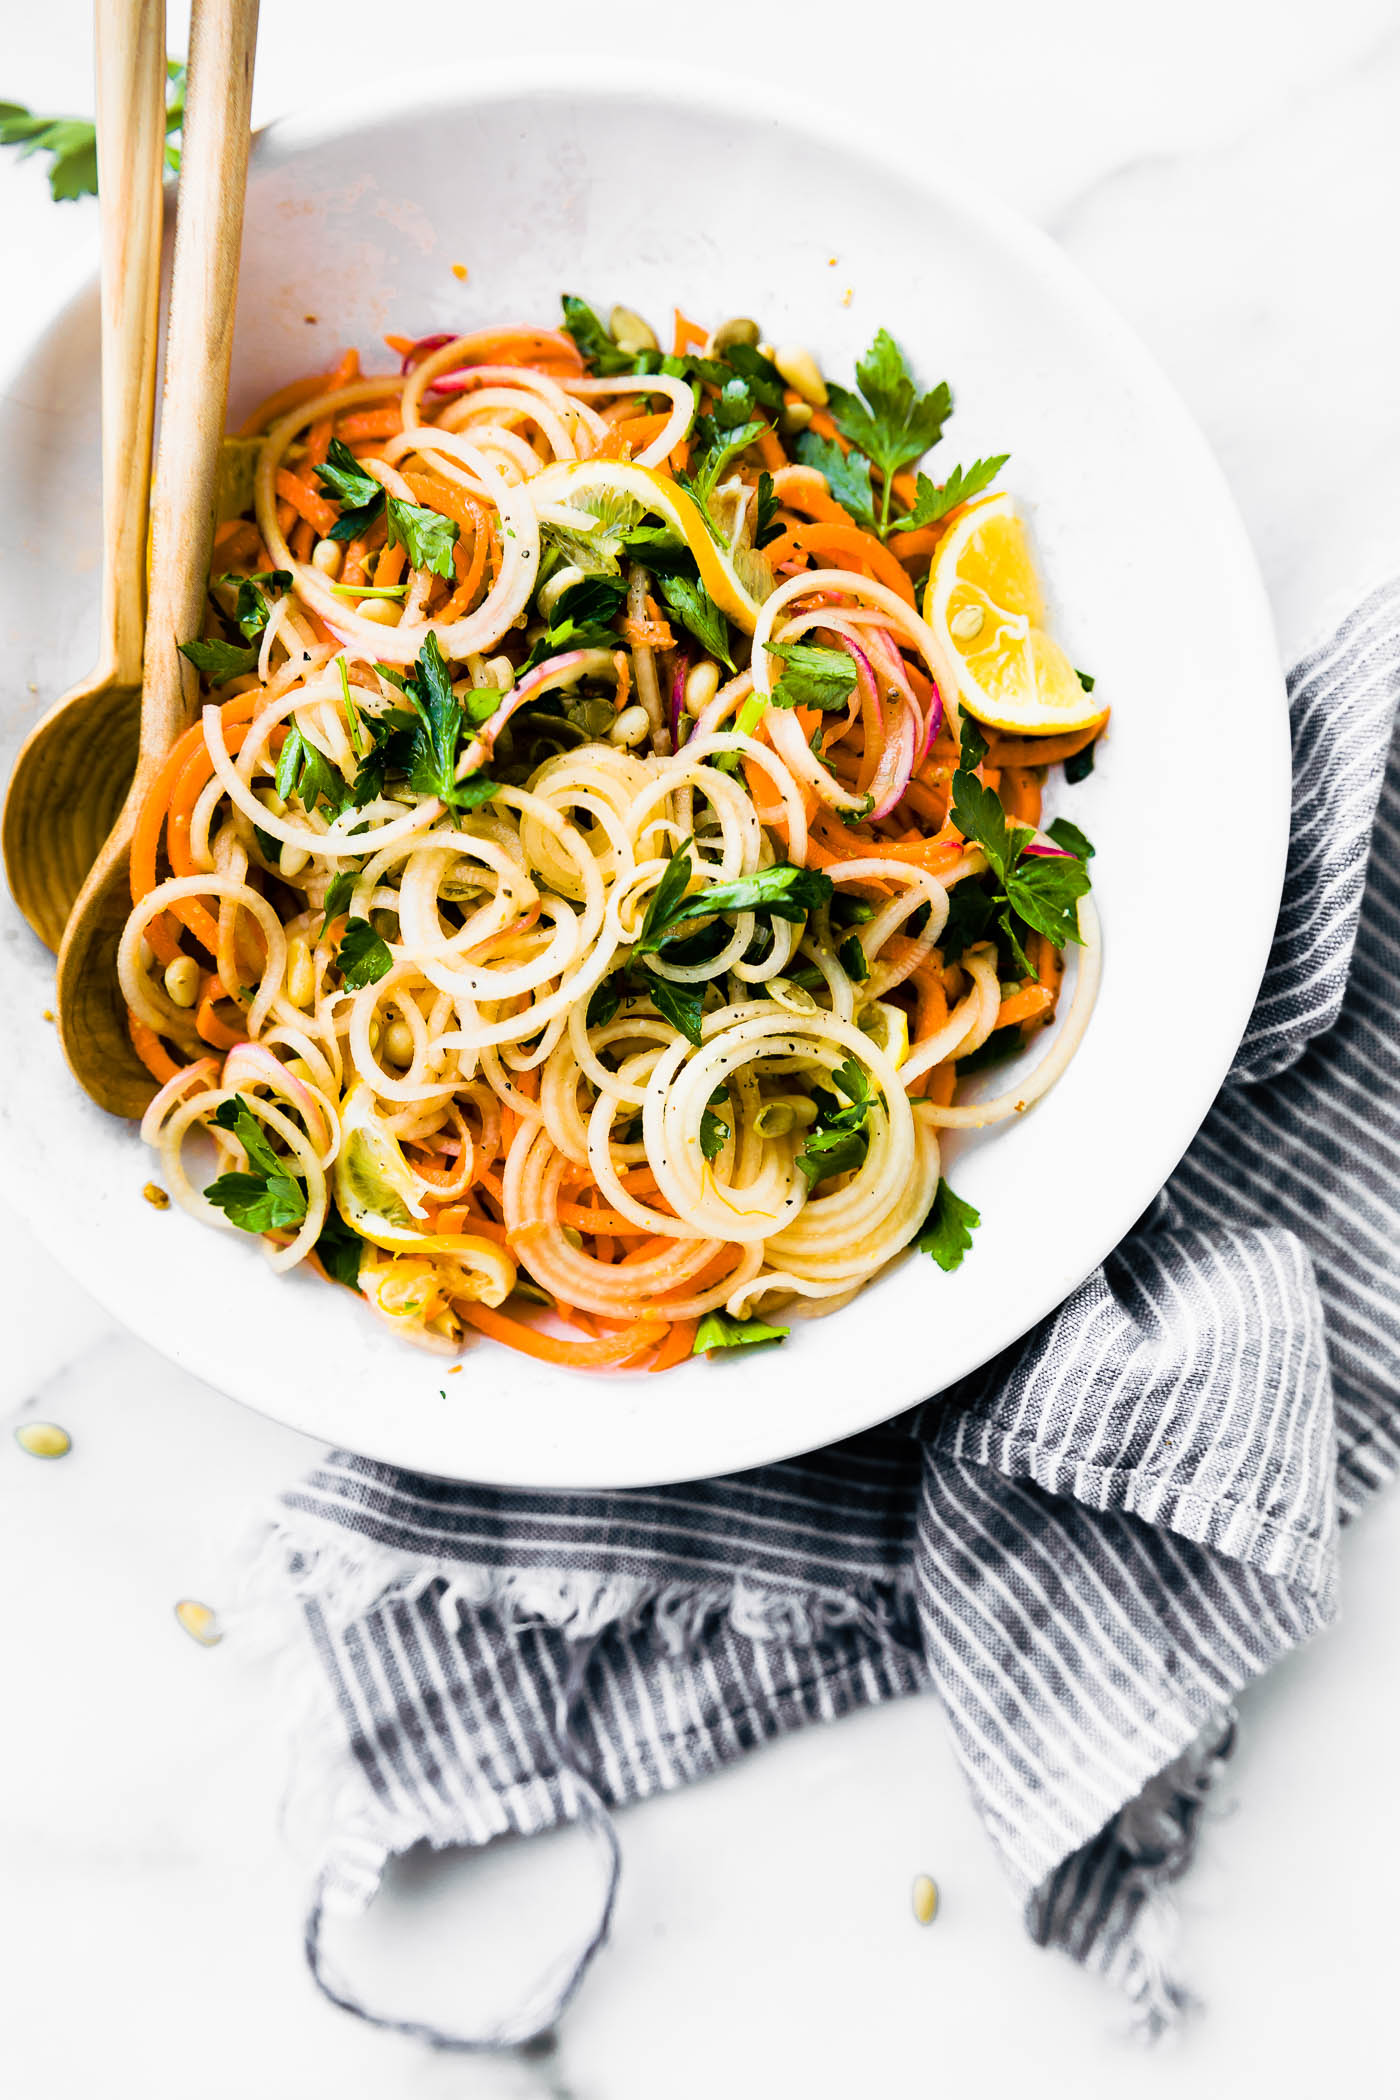 Carrot and Celeriac spiralized salad with sauce in white bowl.